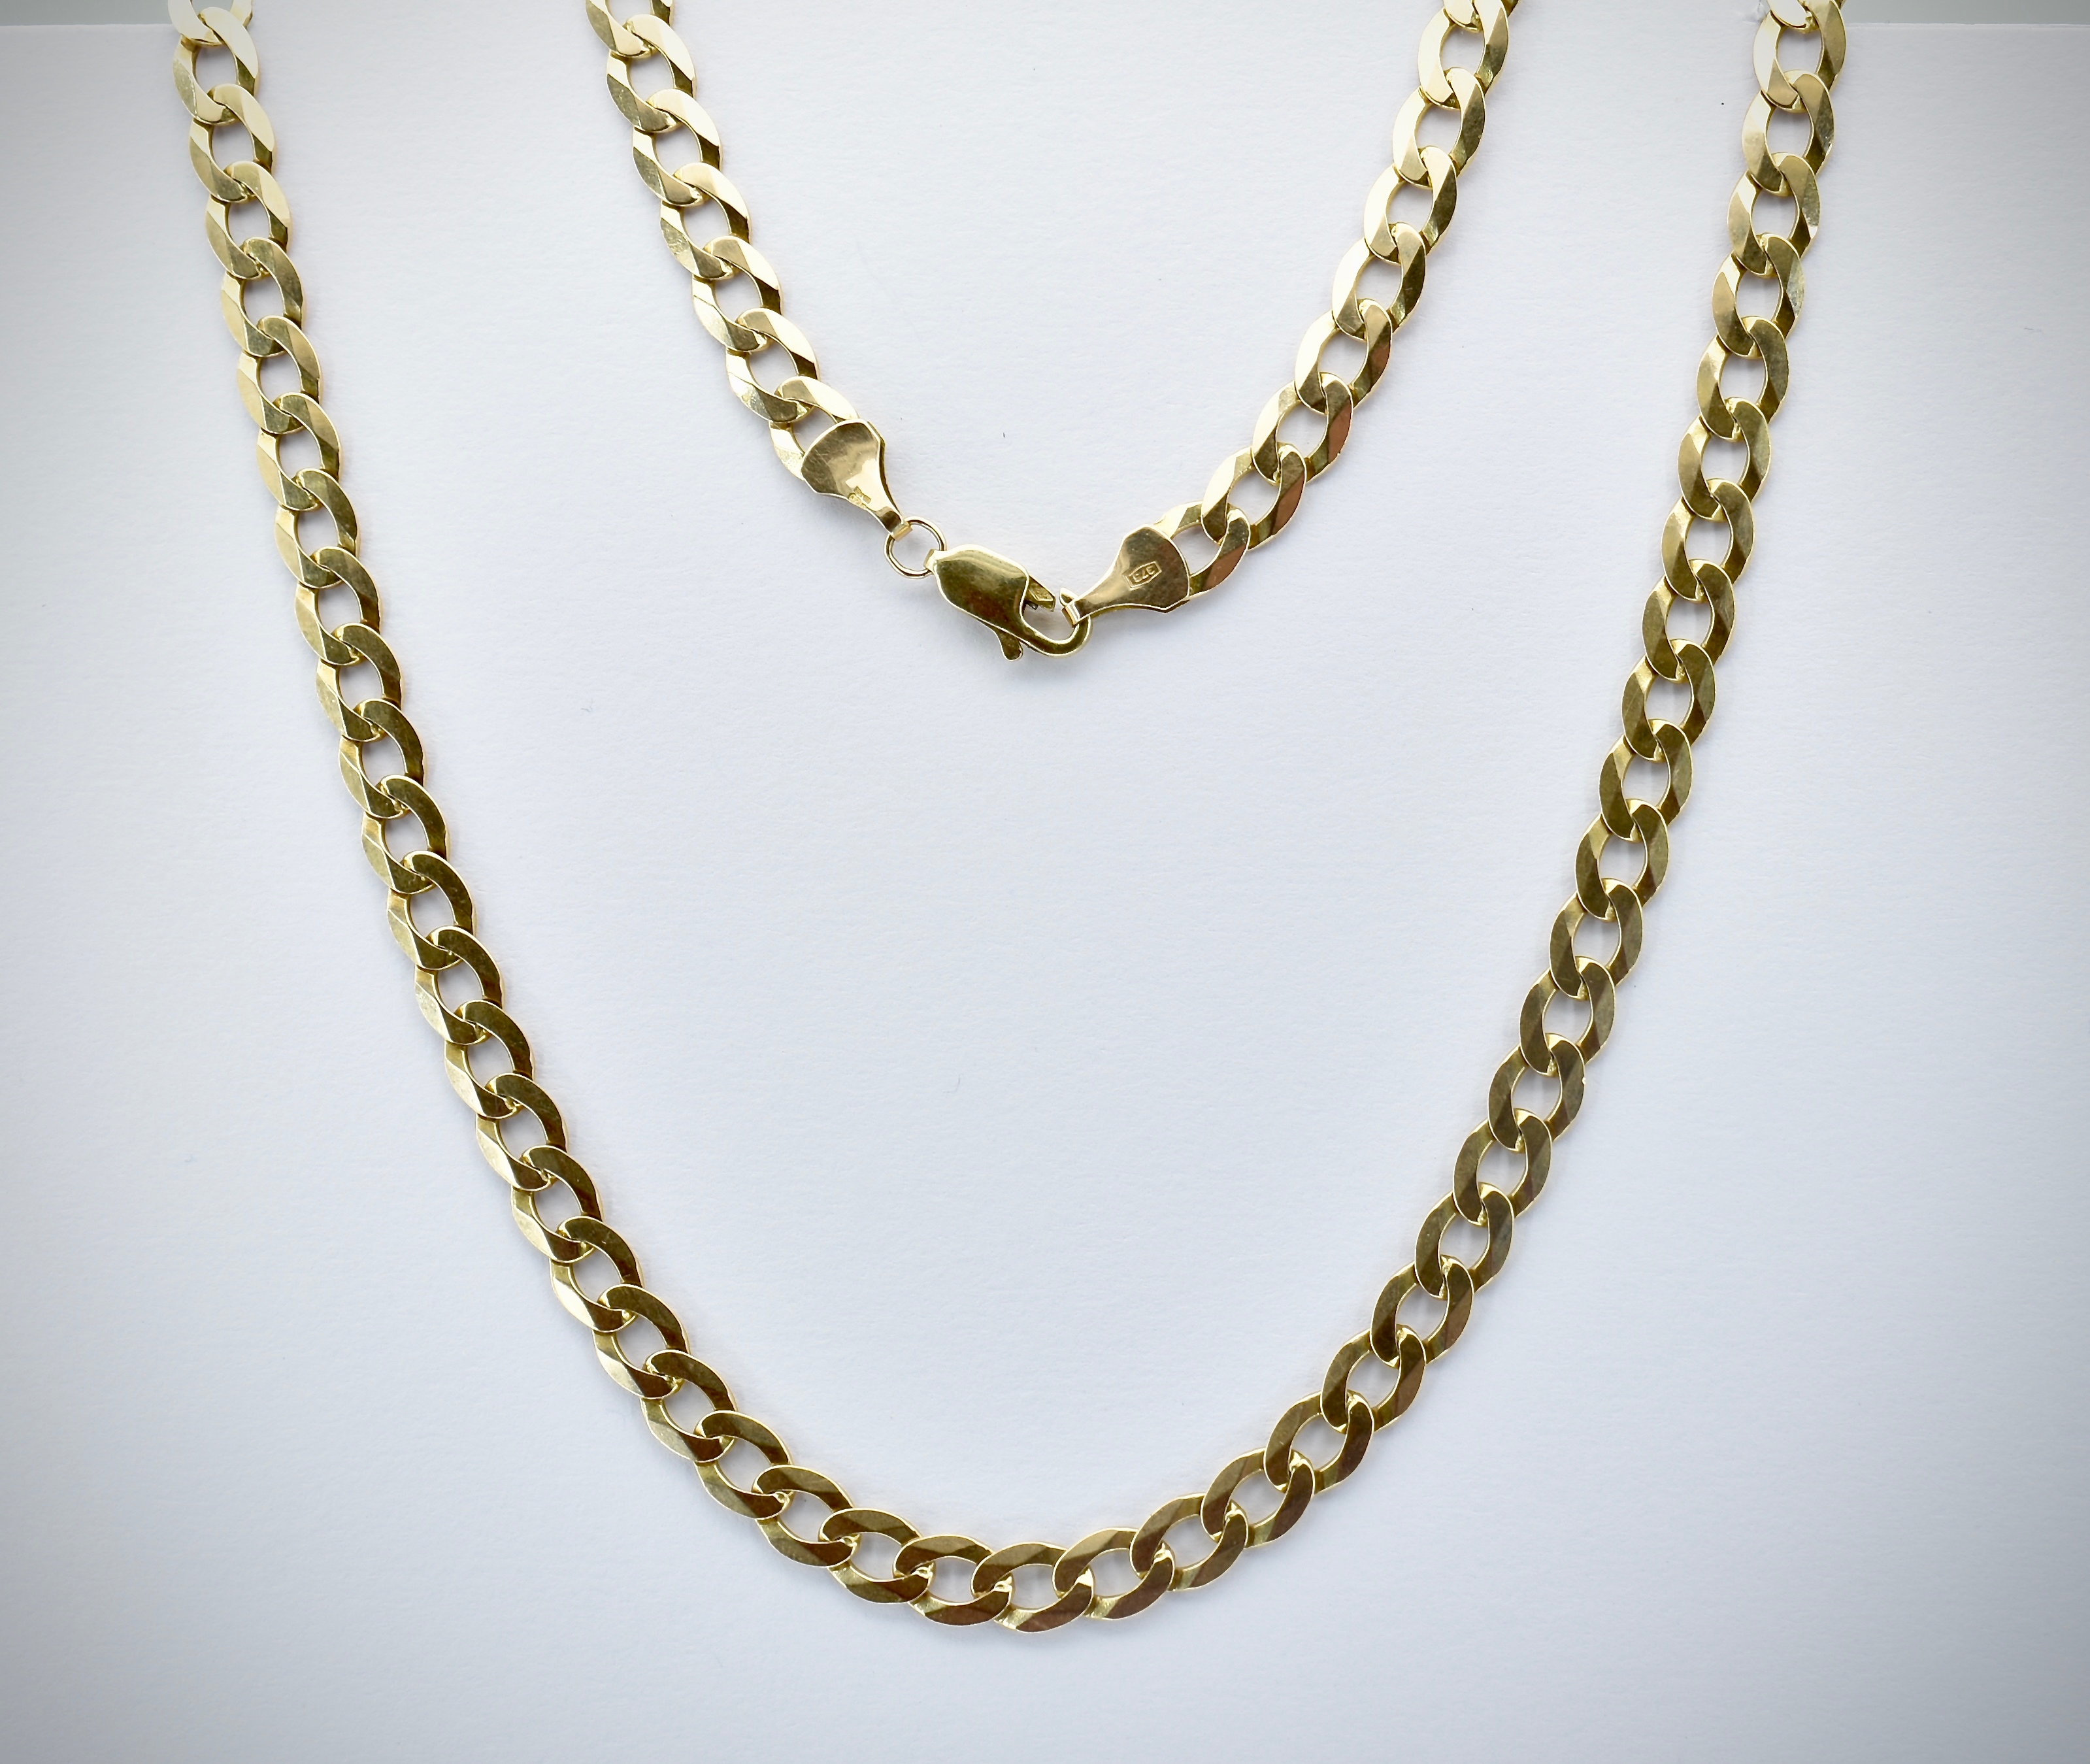 Hallmarked 9ct Gold Curb Chain Necklace - Image 3 of 3